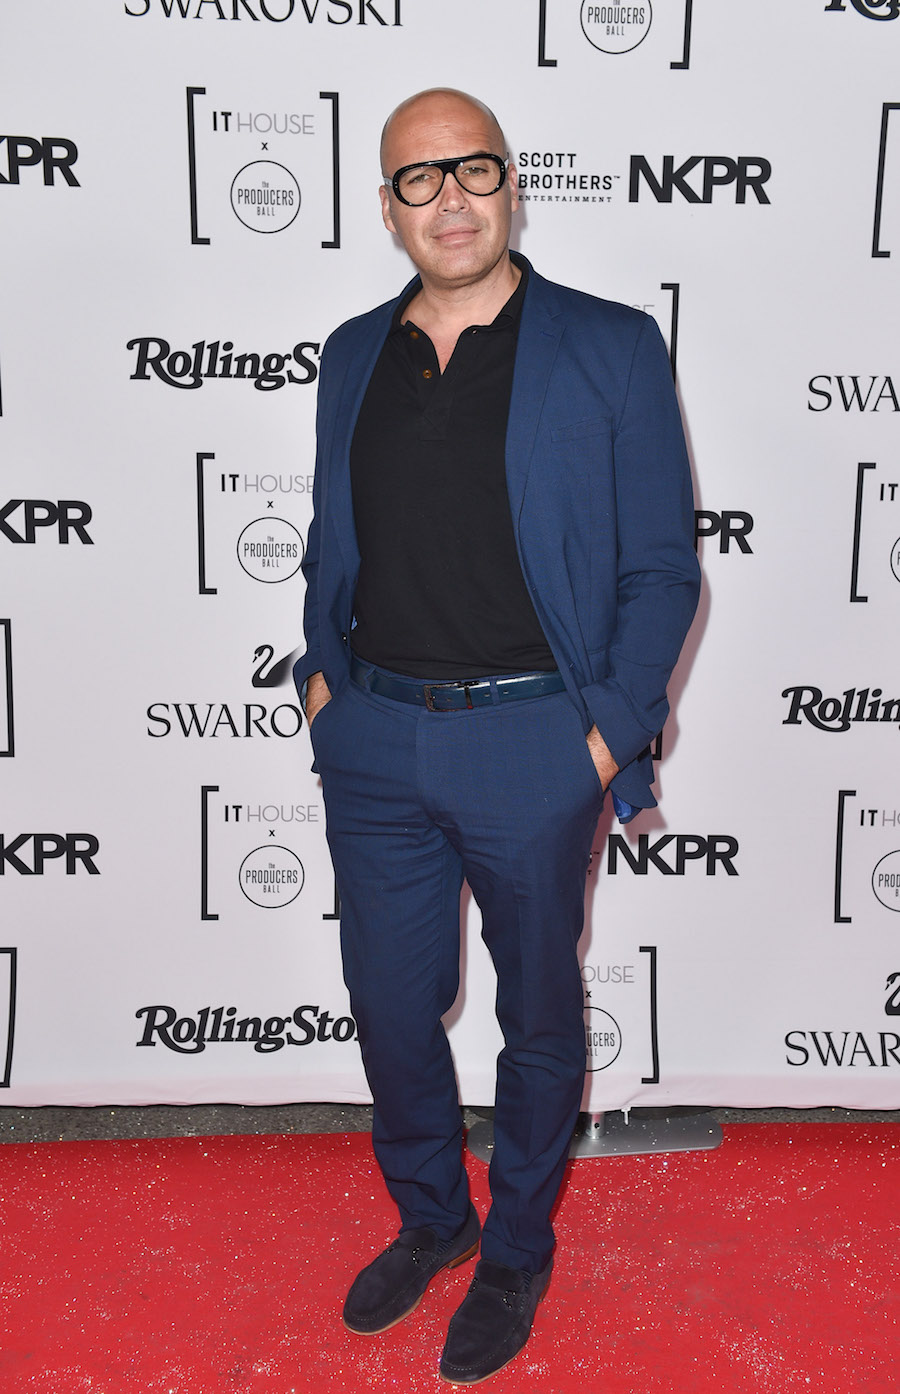 Billy Zane at the IT House x Producers Ball (Photo: Courtesy of NKPR) | View the VIBE